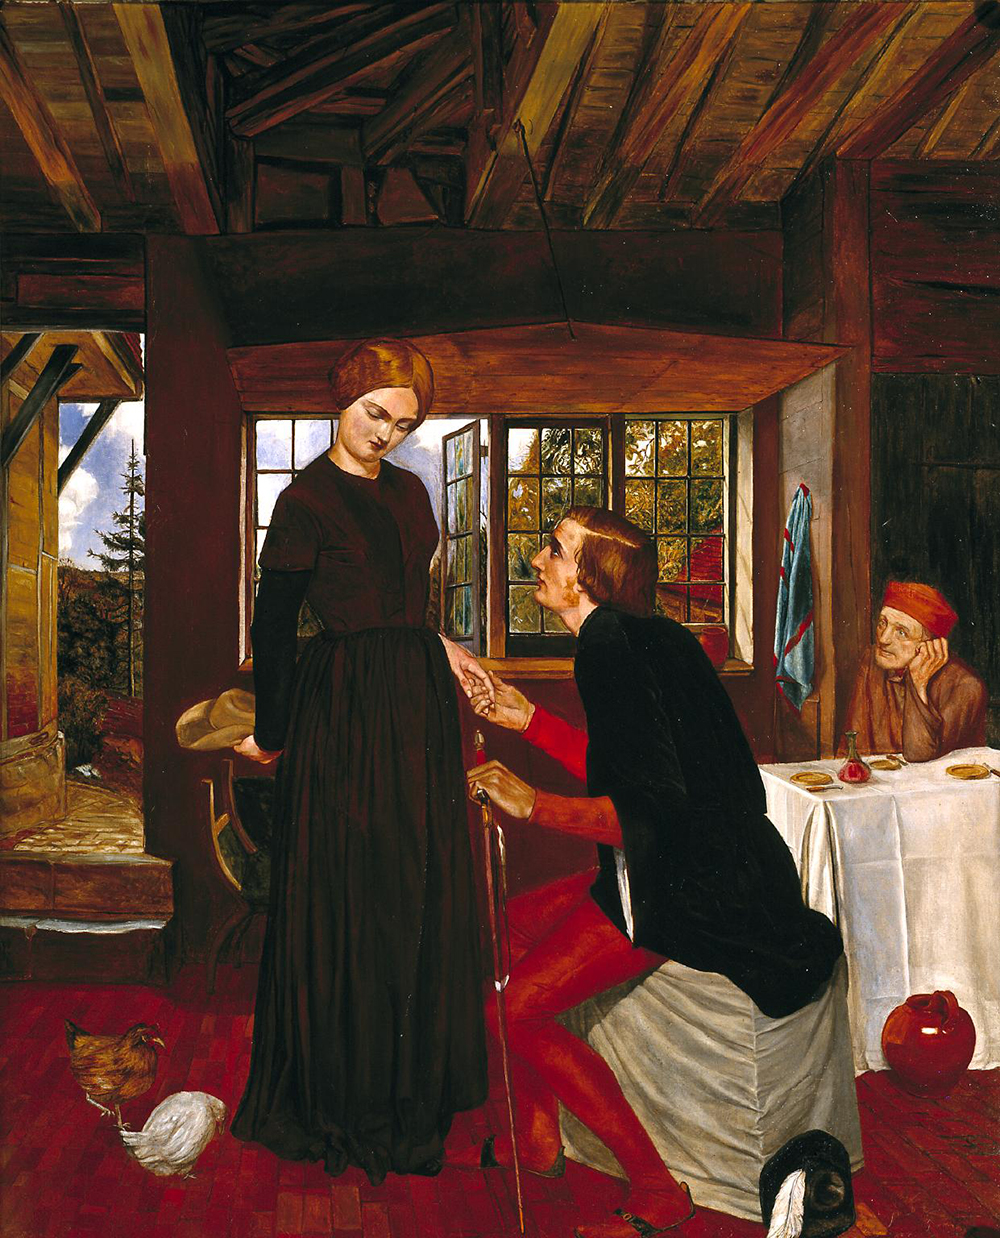 The Proposal, by Frederic George Stephens, c. 1850. Photograph © Tate (CC-BY-NC-ND 3.0).